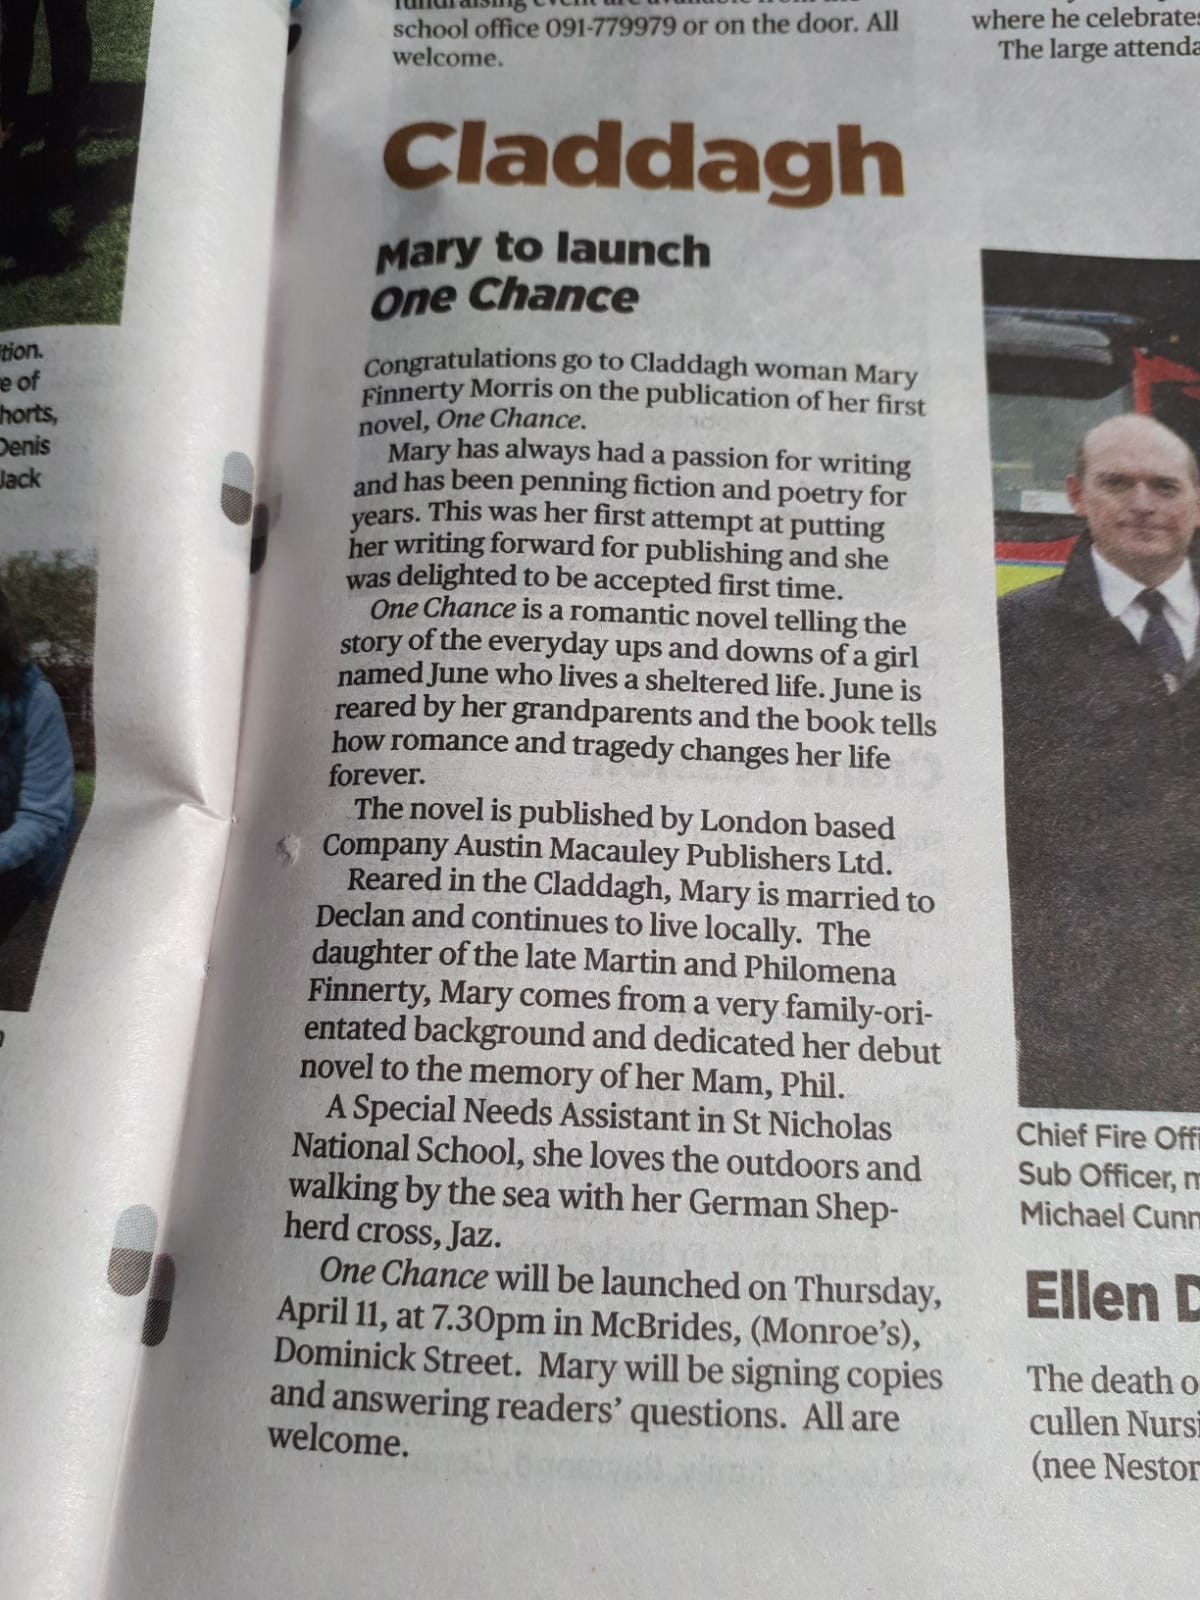 One Chance’s Author Congratulated on Her Publication by the Connacht Tribune